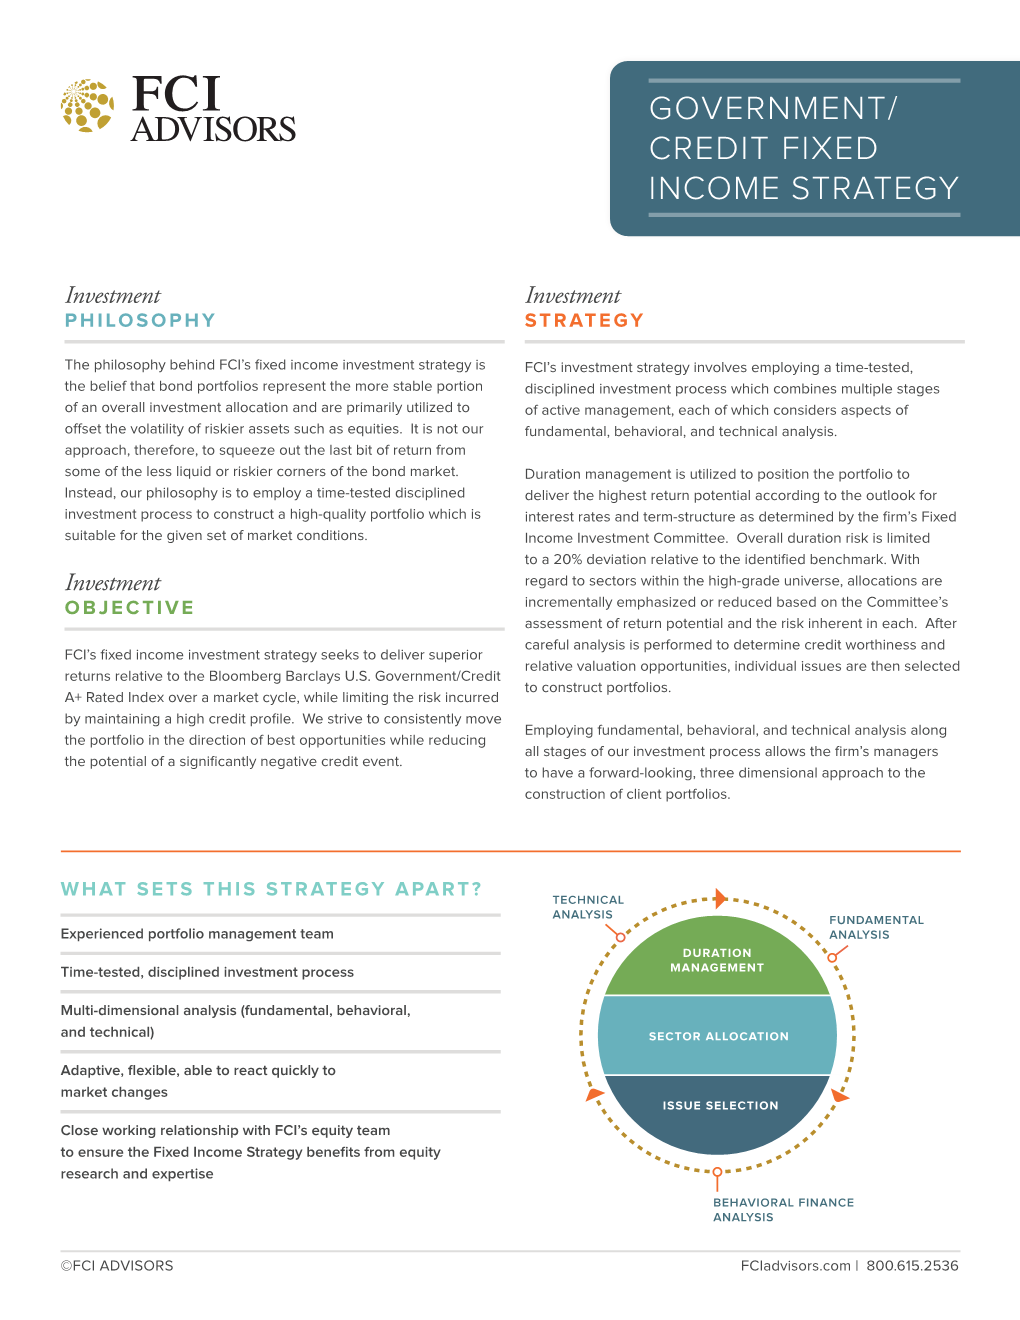 Government/ Credit Fixed Income Strategy